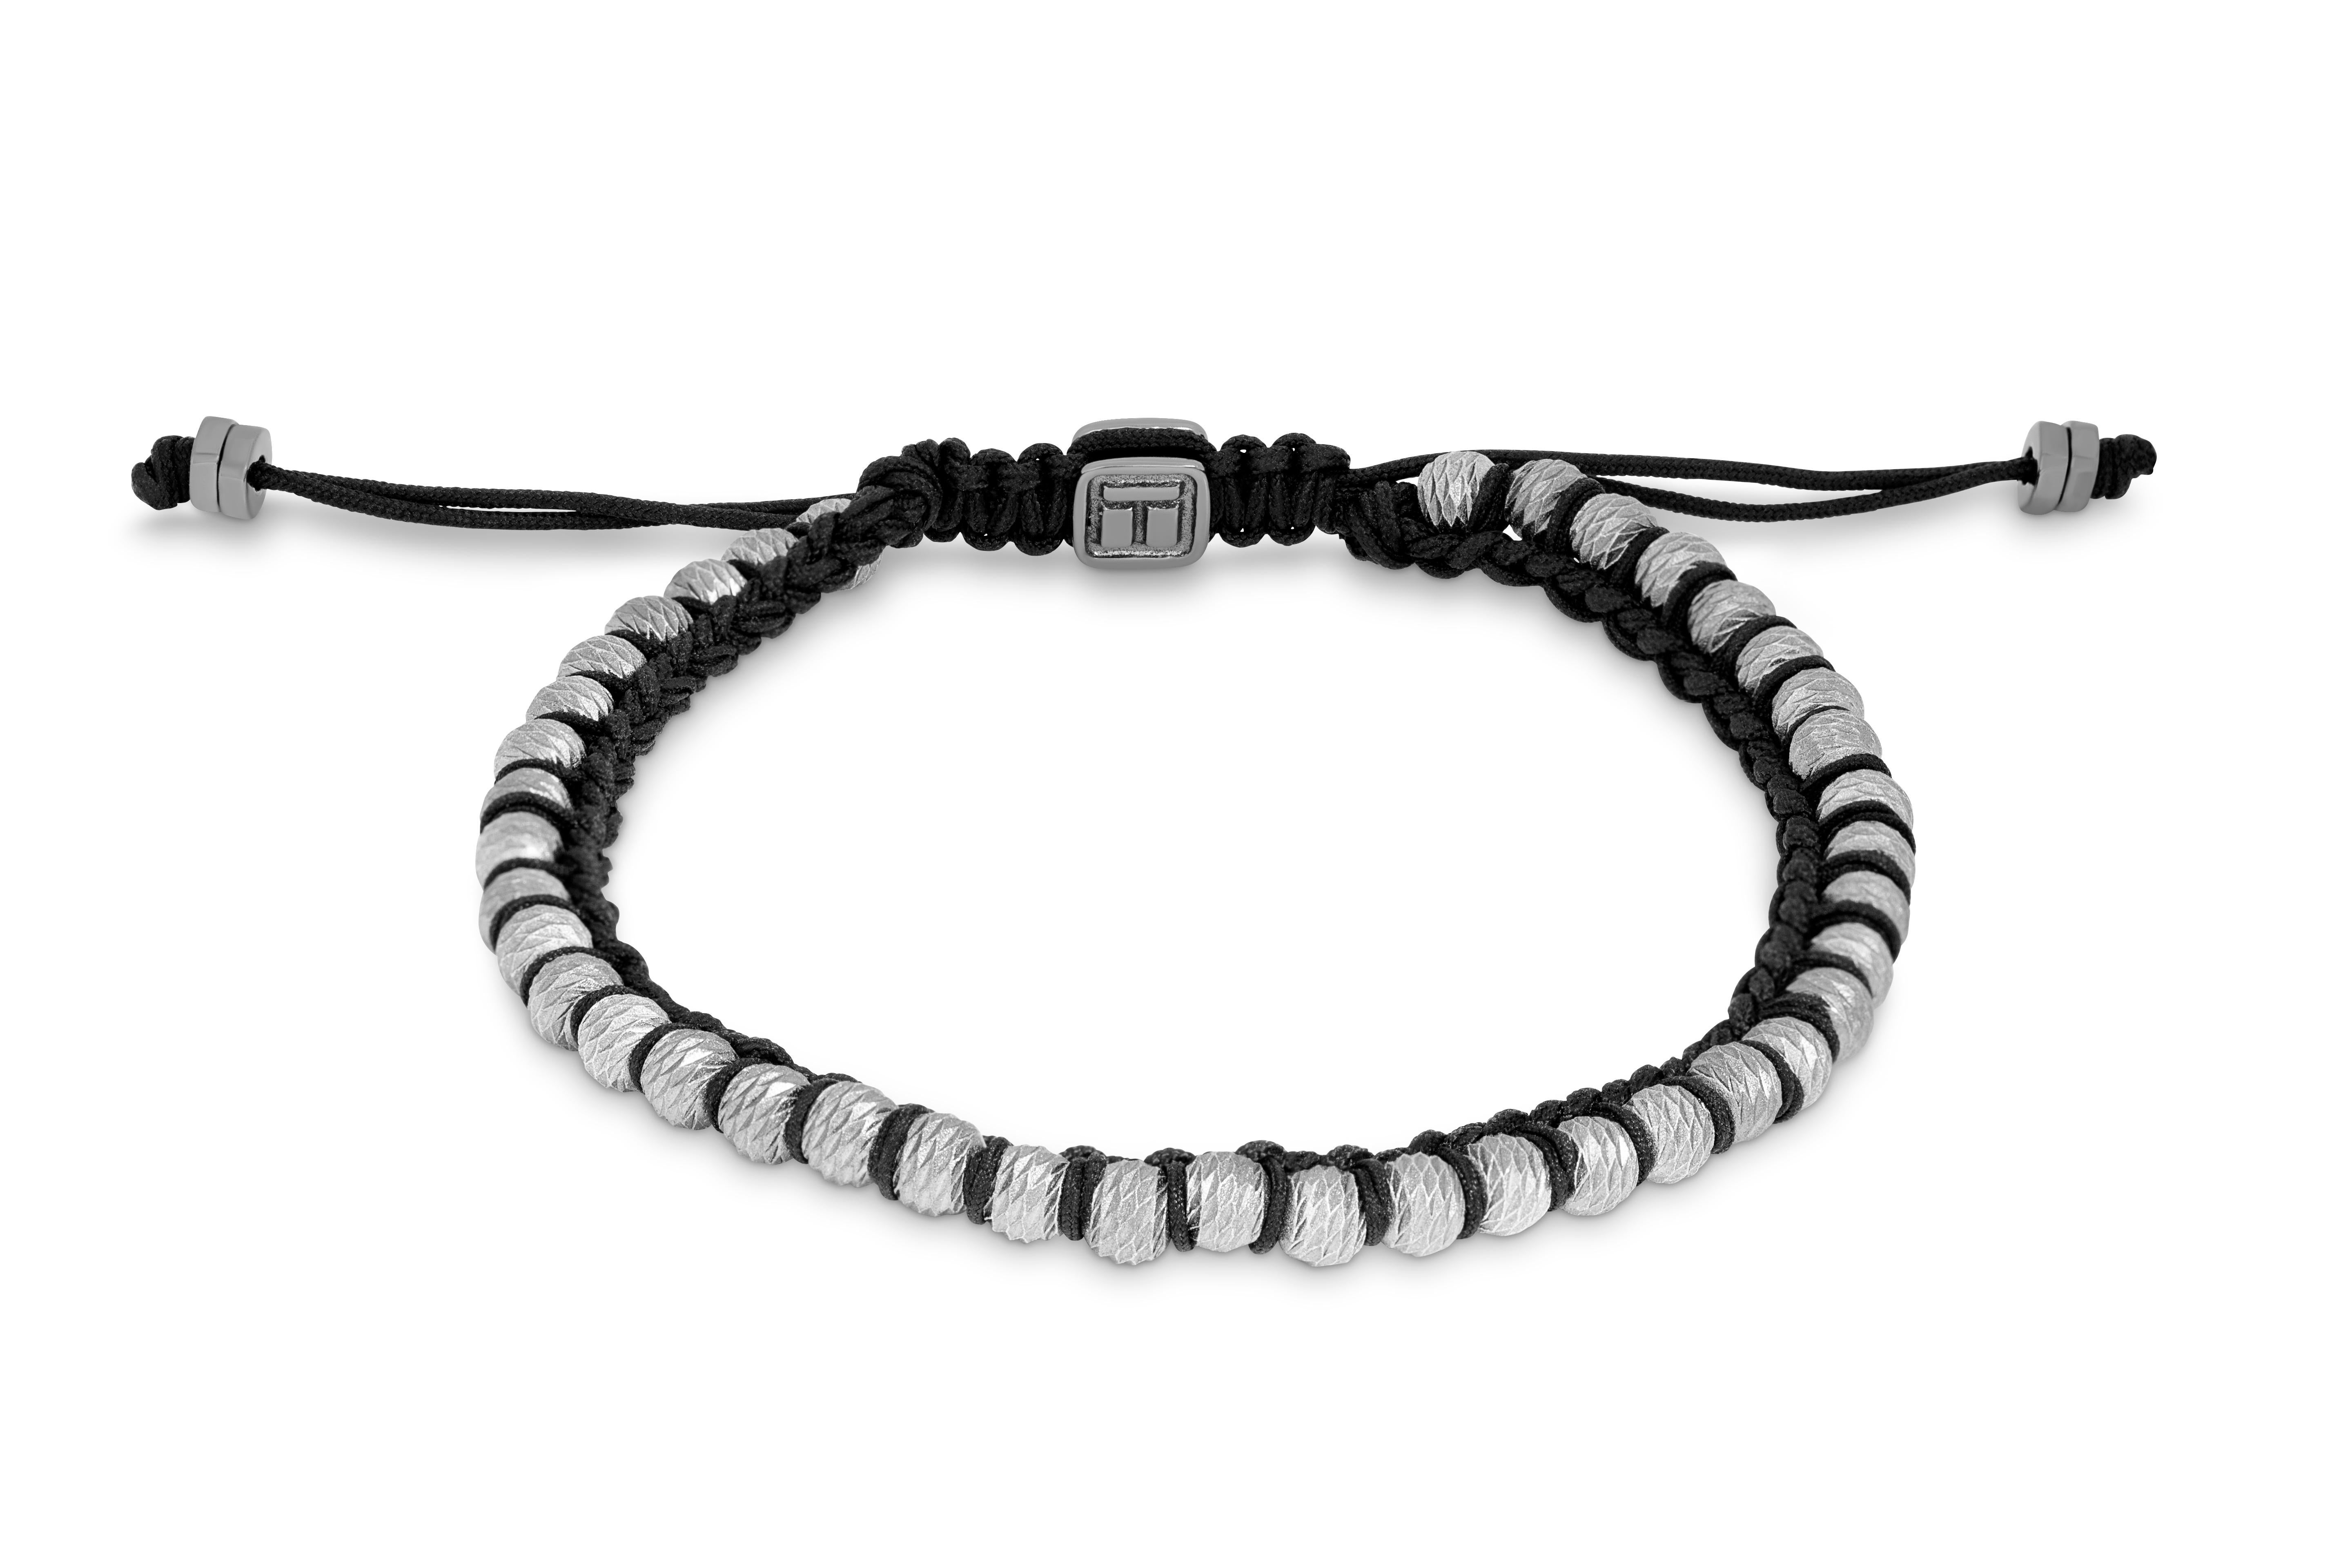 Sennit Classico Bracelet in Macrame with Rhodium-Plated Sterling Silver, Size S

This sleek and versatile macrame bracelet is made from a unique macrame braiding combined with textured round silver beads. Each bracelet takes around an hour and a